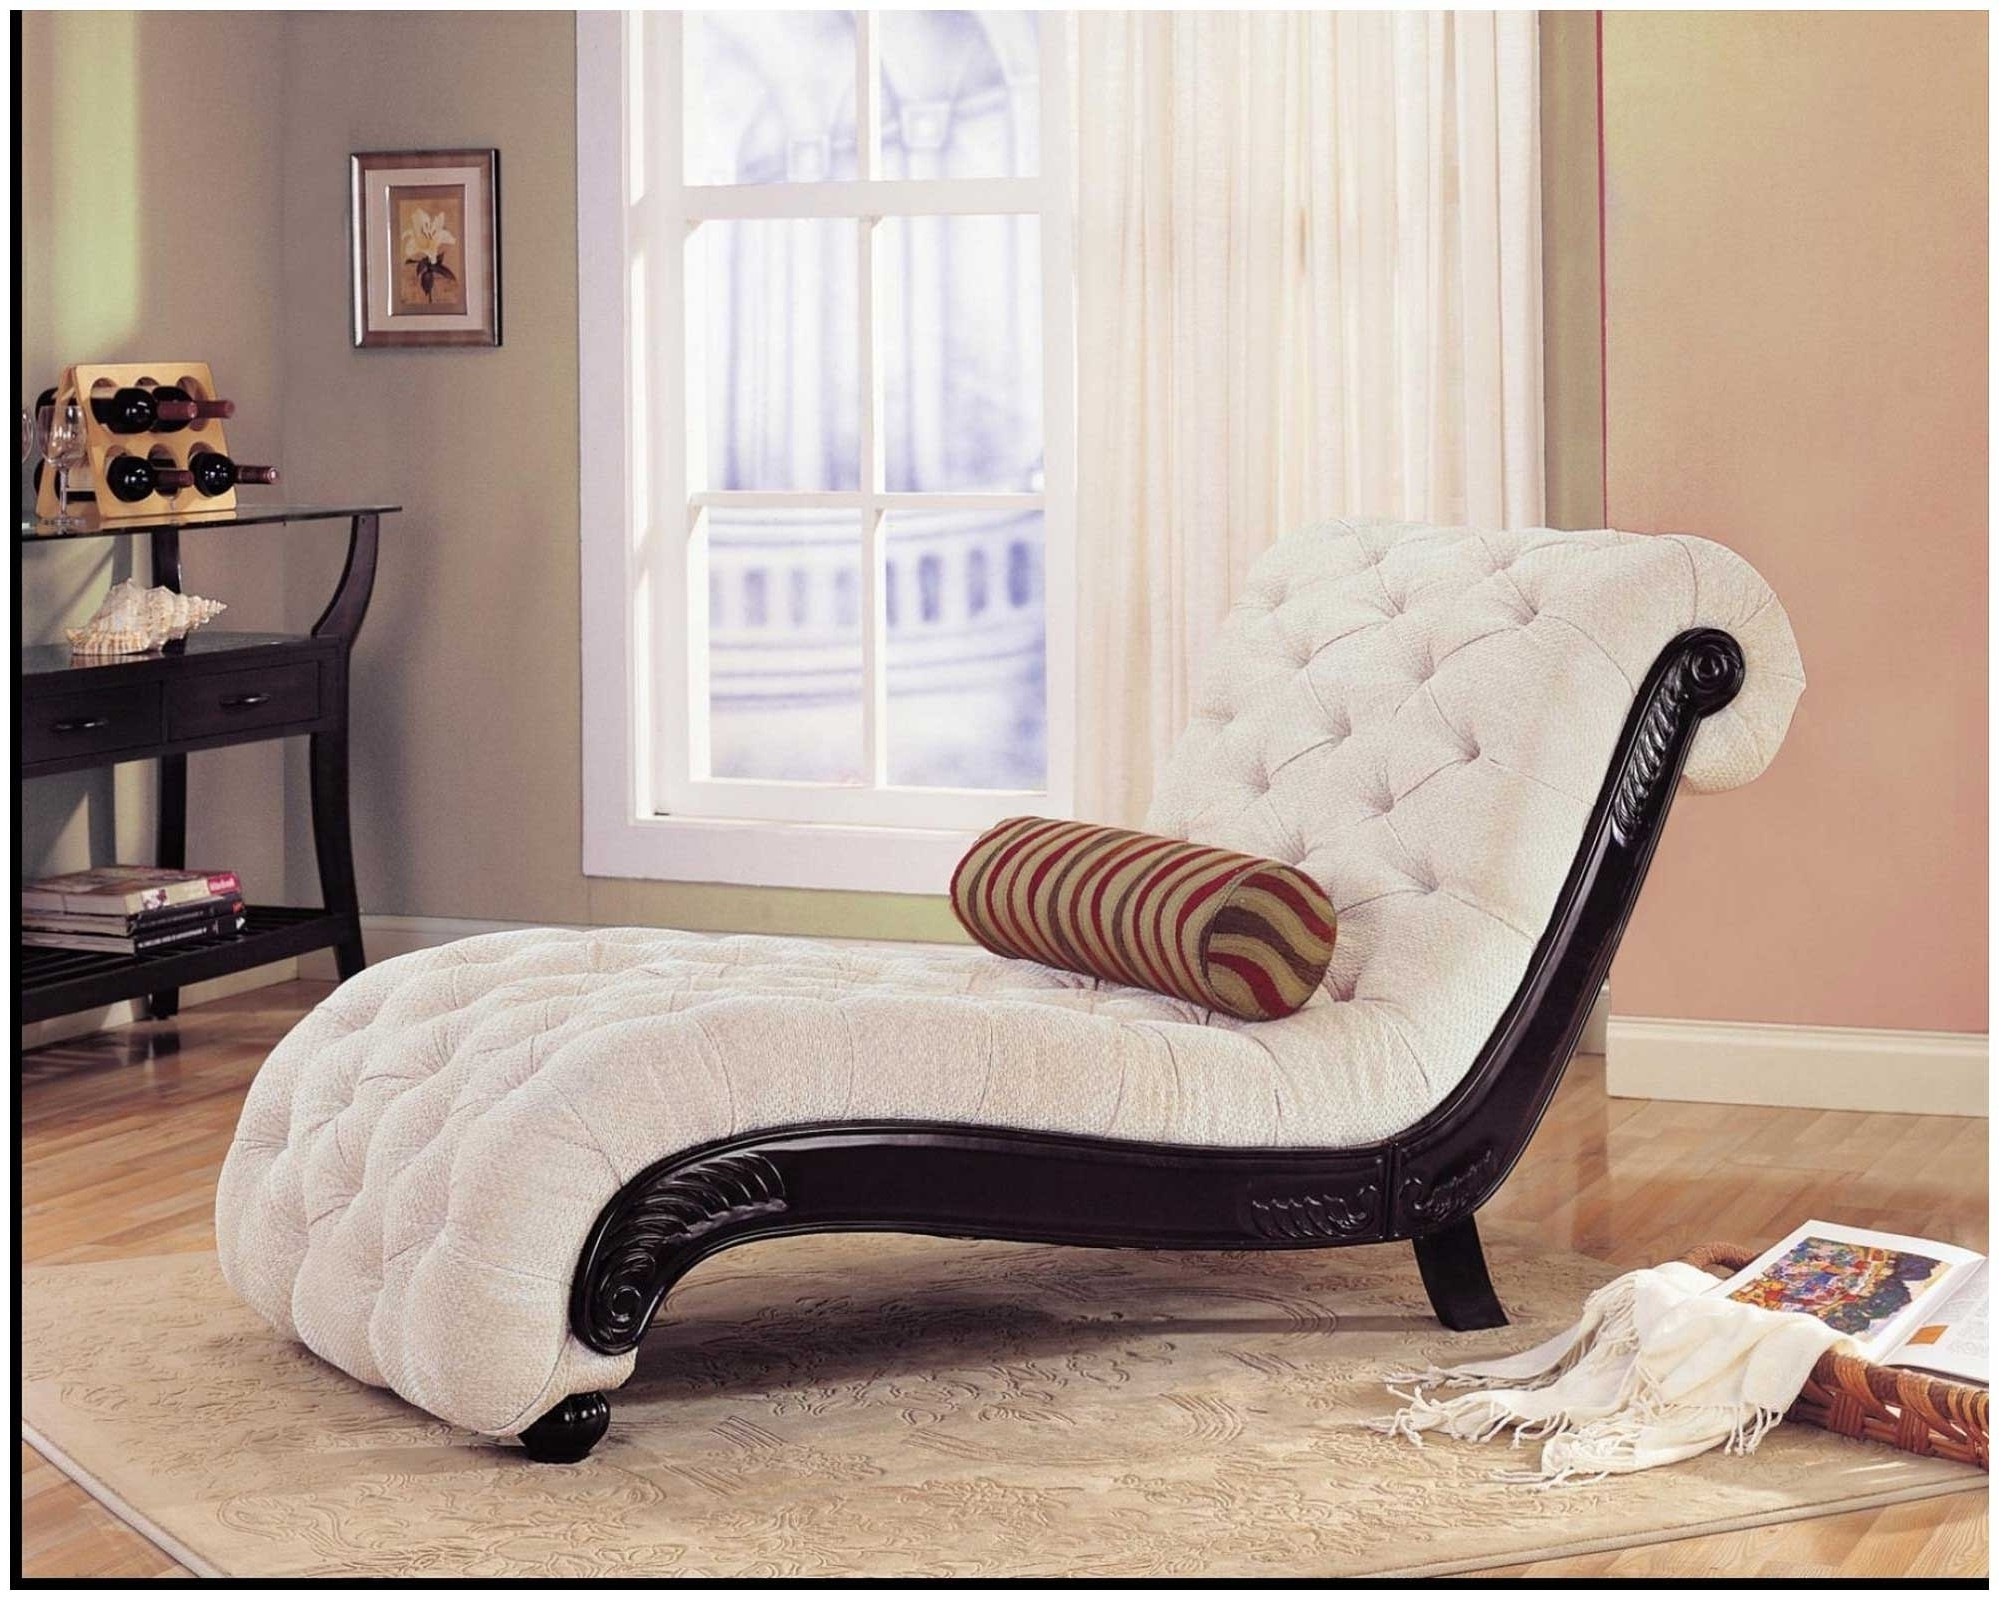 Chaise Decor In Bedroom